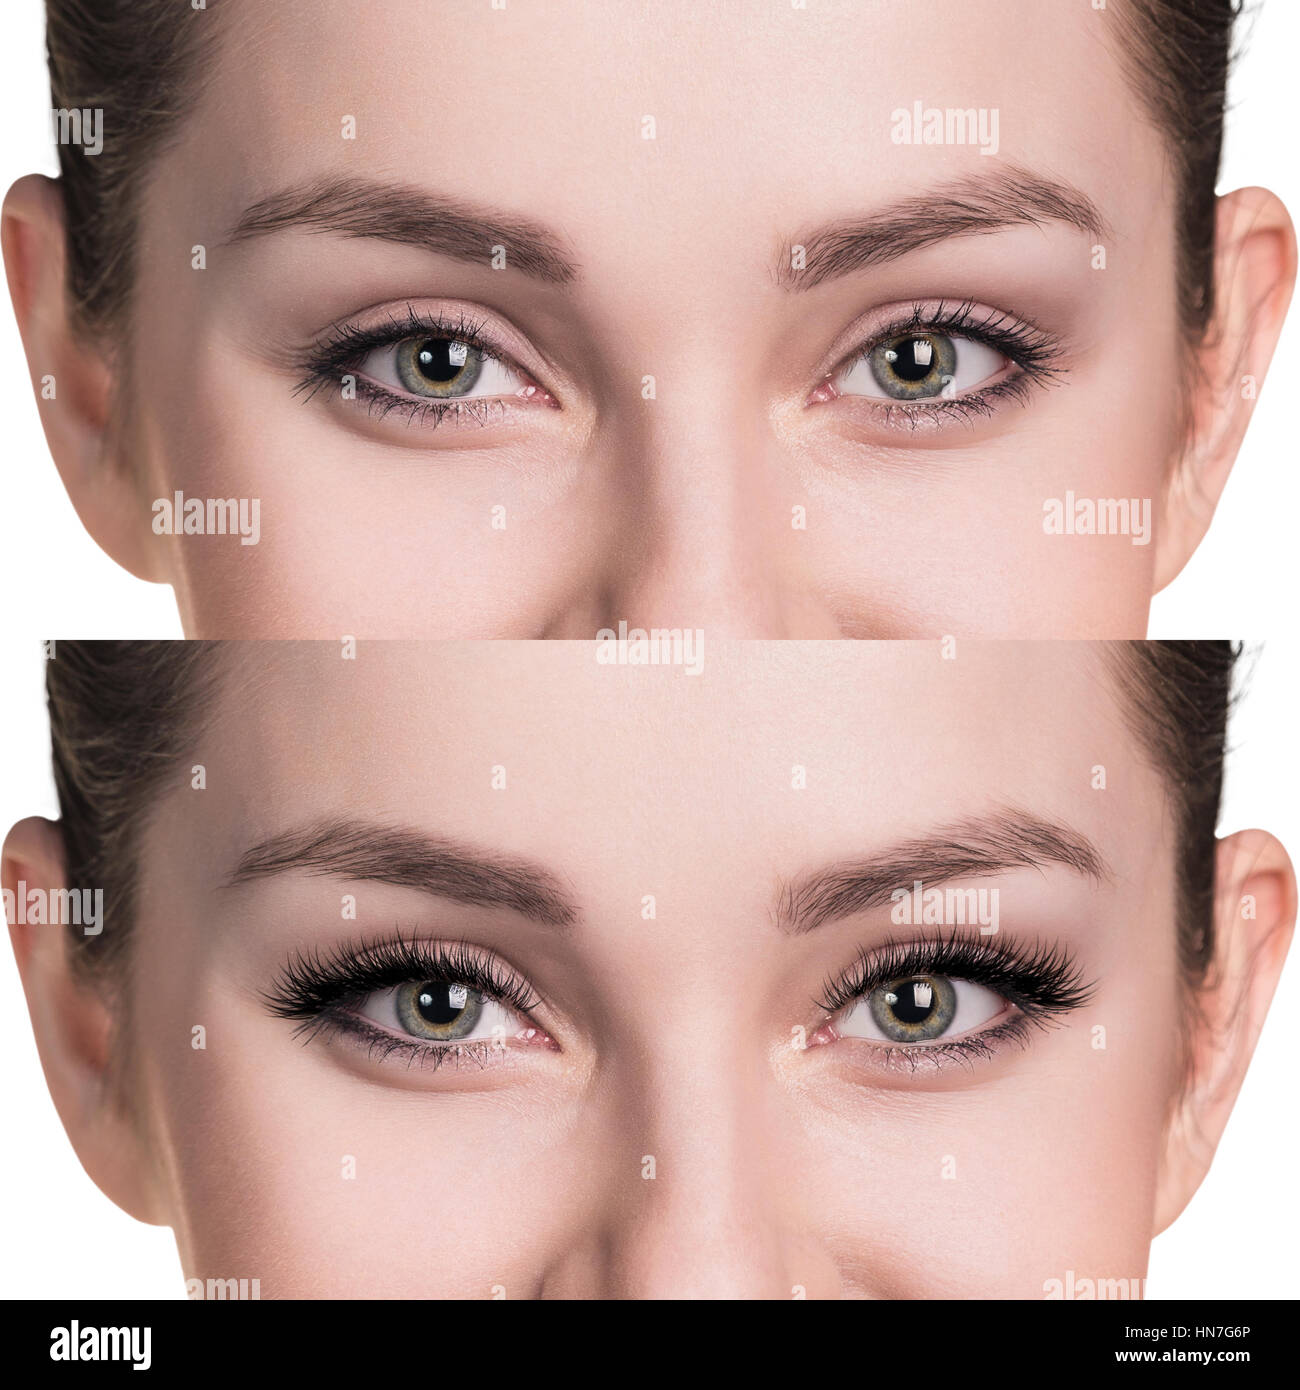 Female eyes before and after eyelash extension Stock Photo